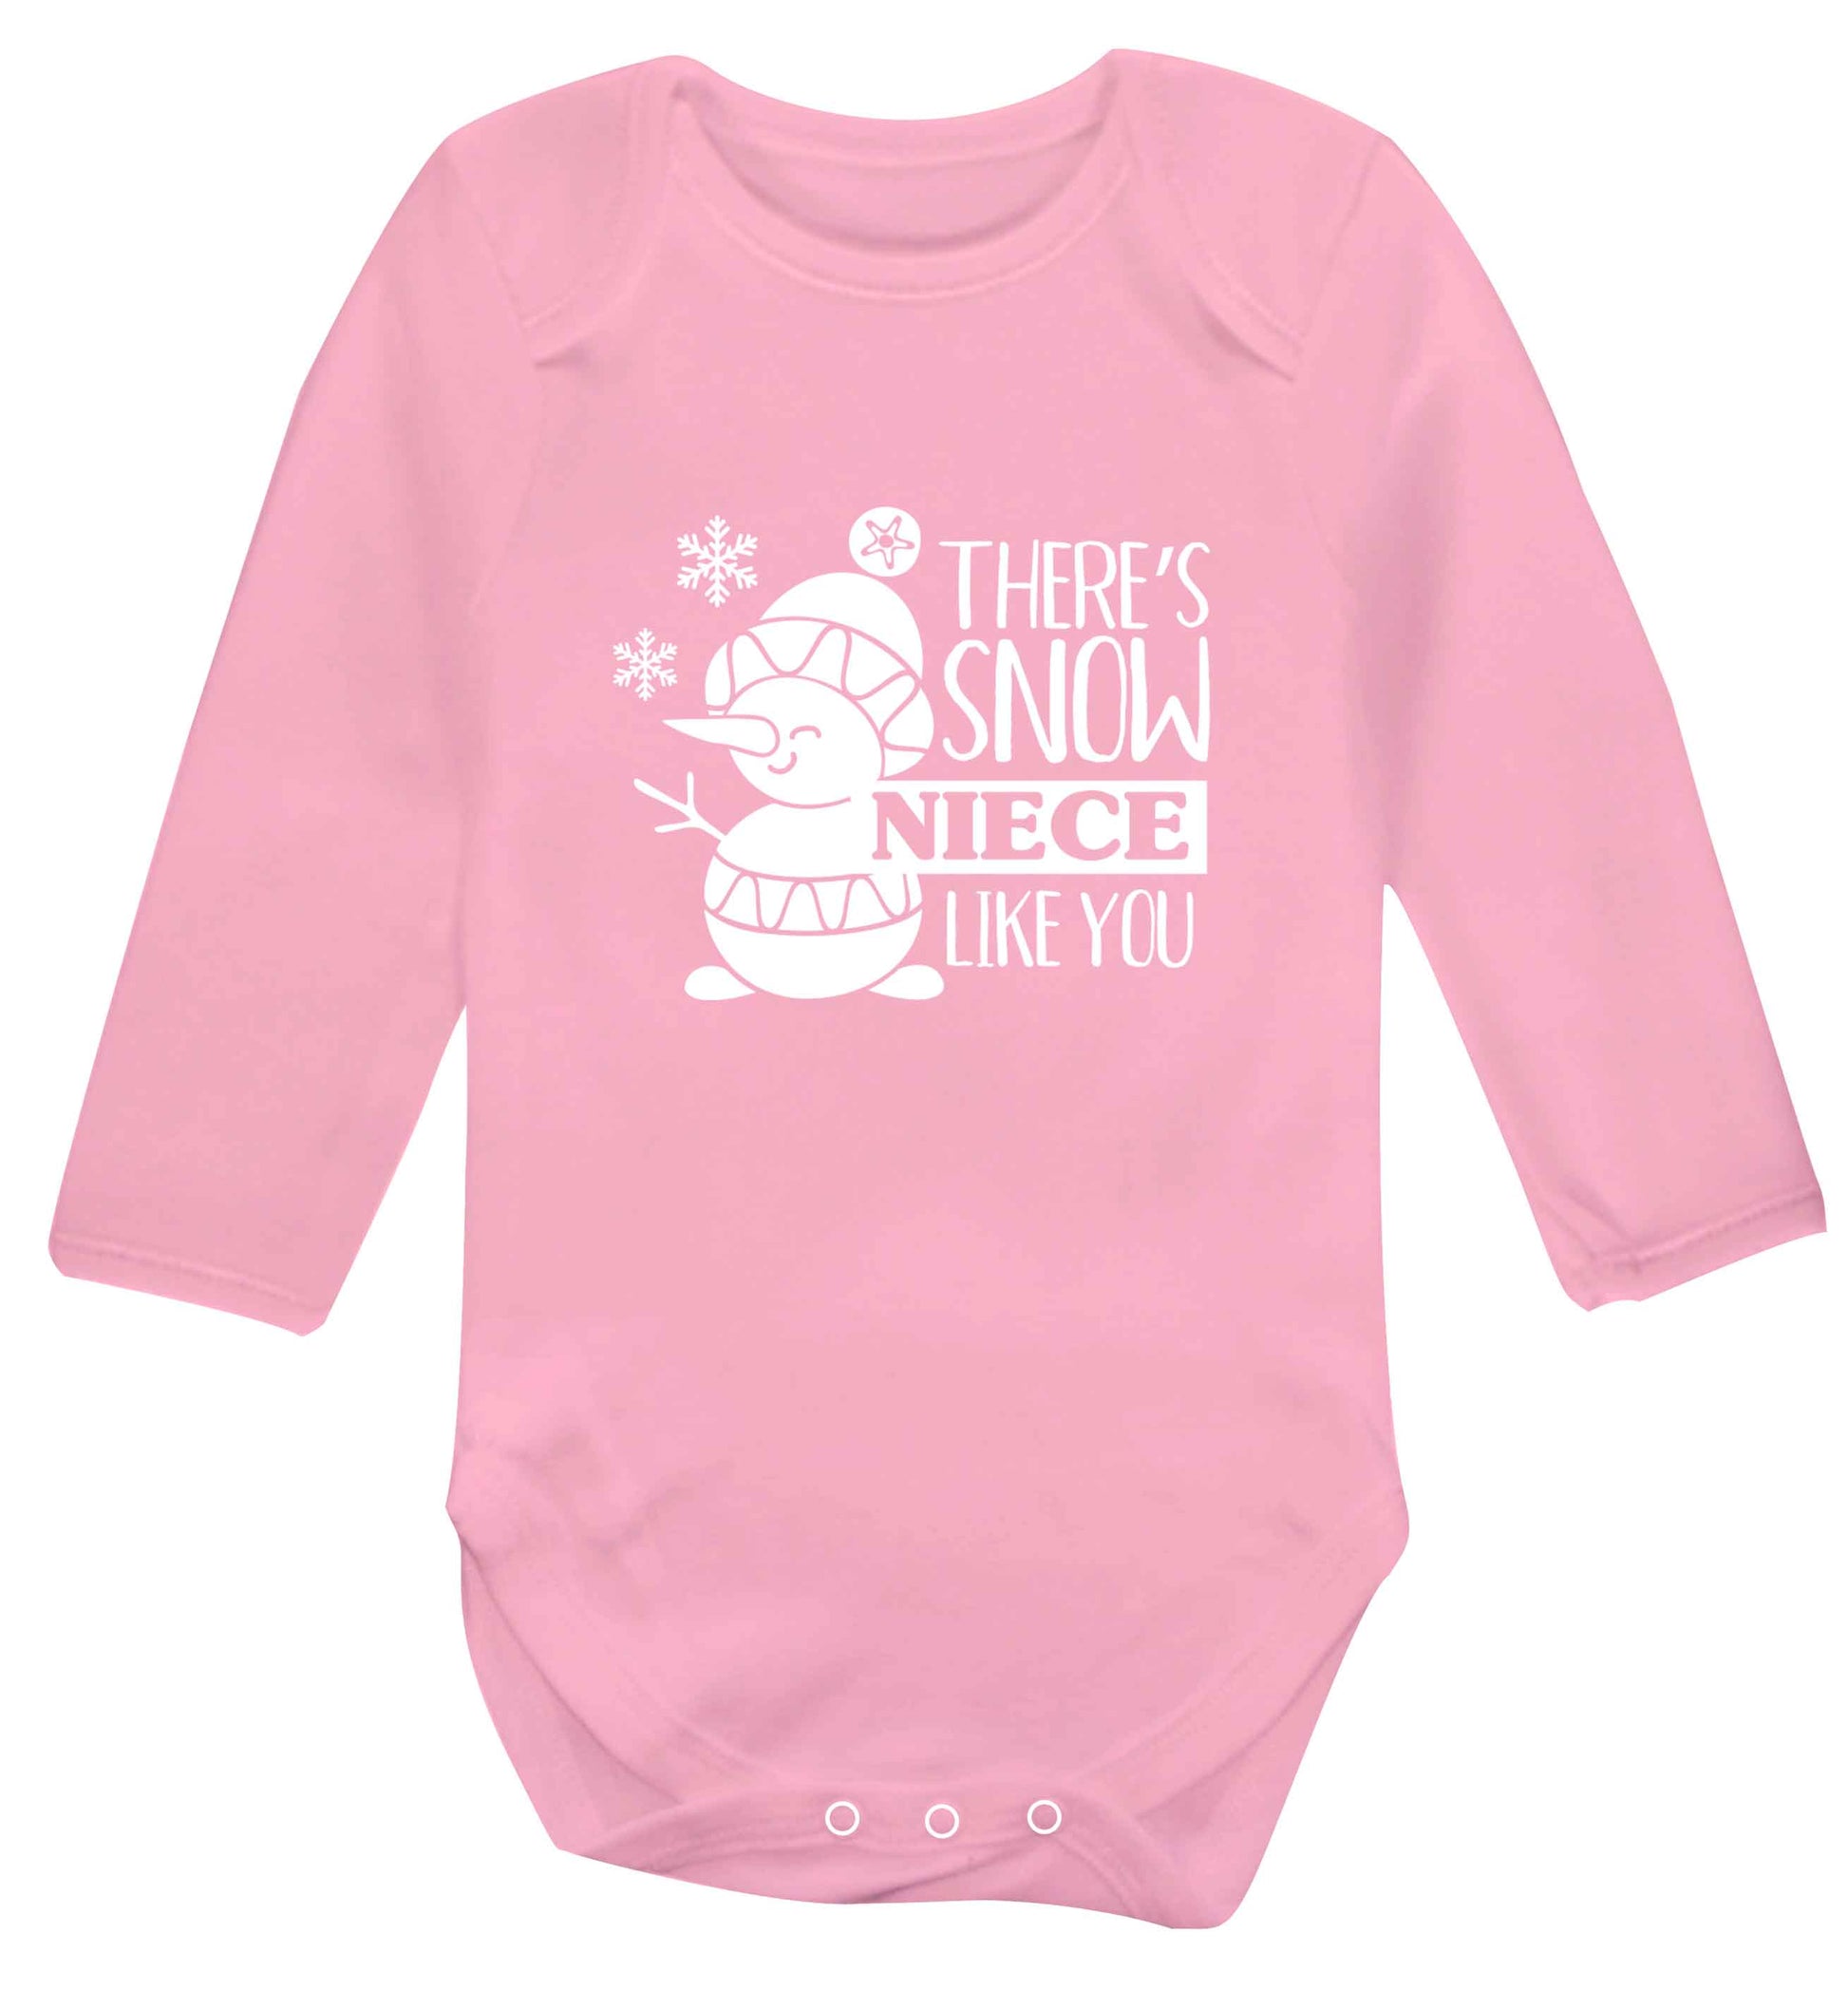 There's snow niece like you baby vest long sleeved pale pink 6-12 months